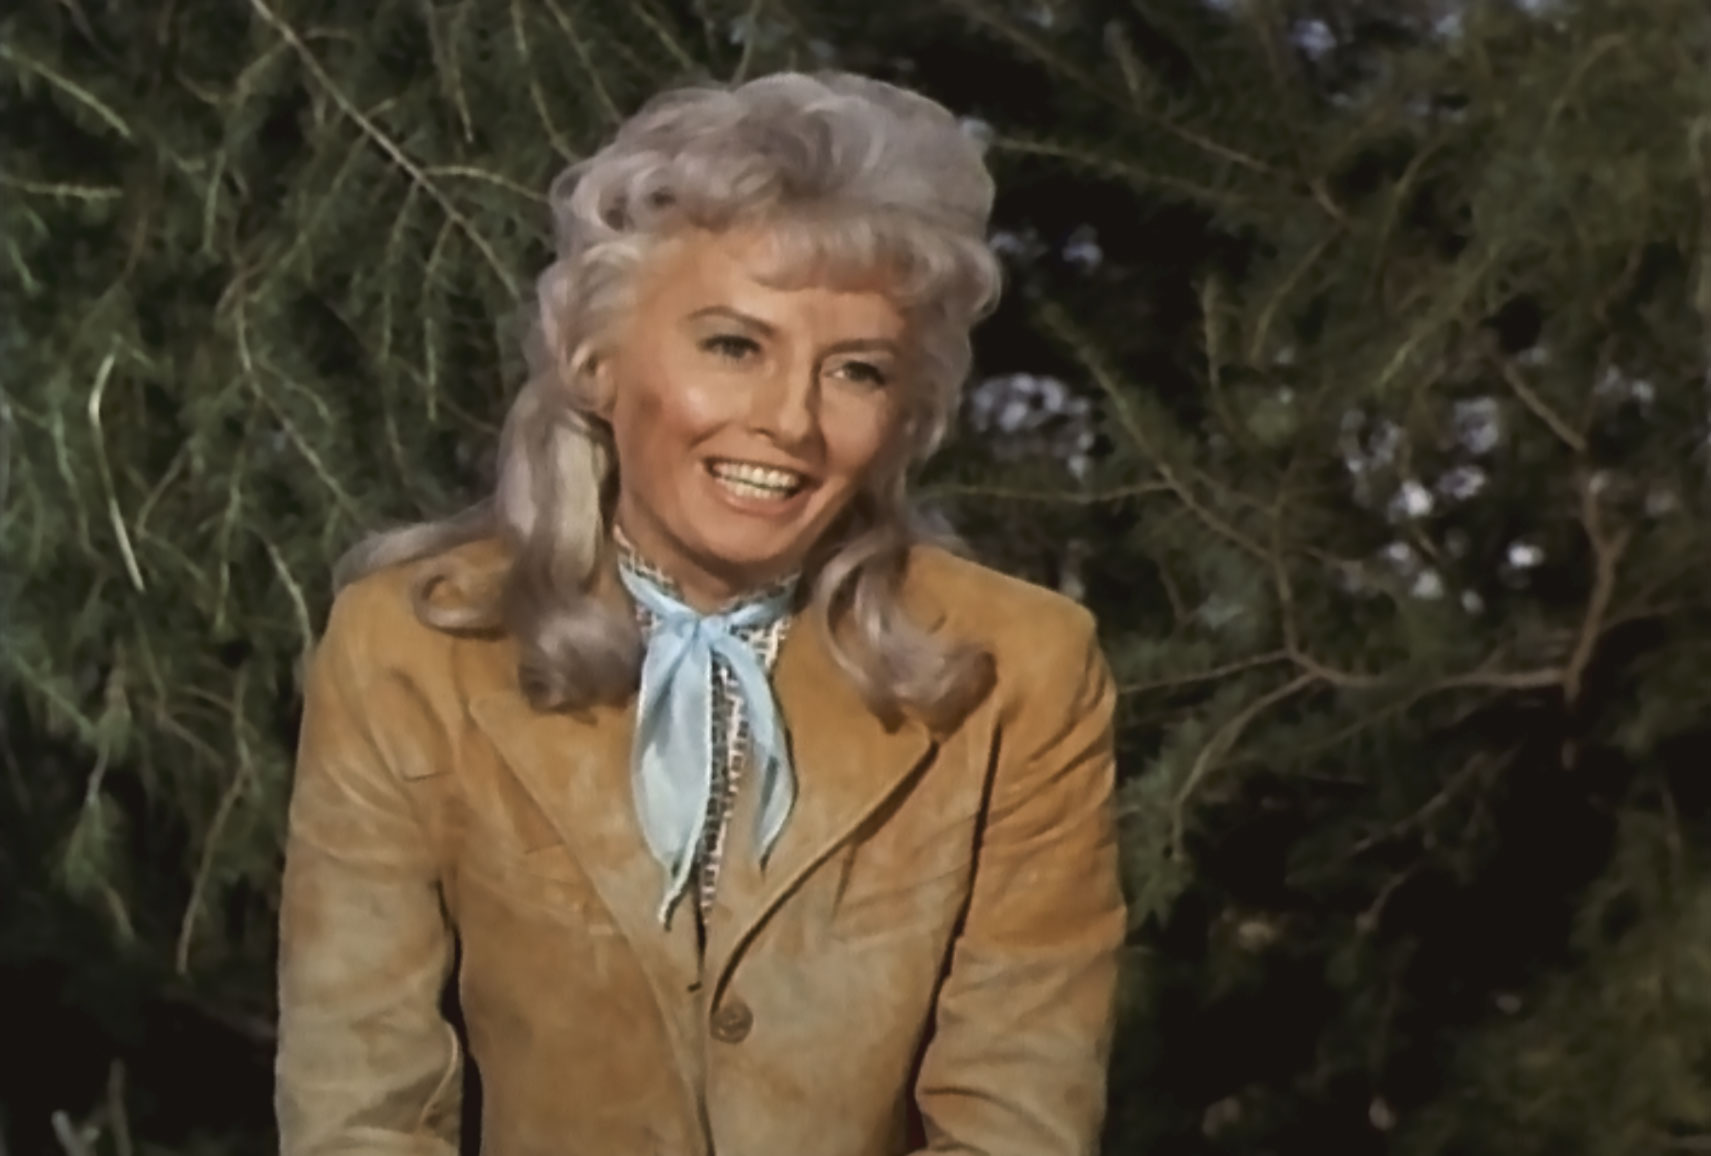 The Big Valley and Beyond: The Life & Career of Barbara Stanwyck - INSP TV  | TV Shows and Movies